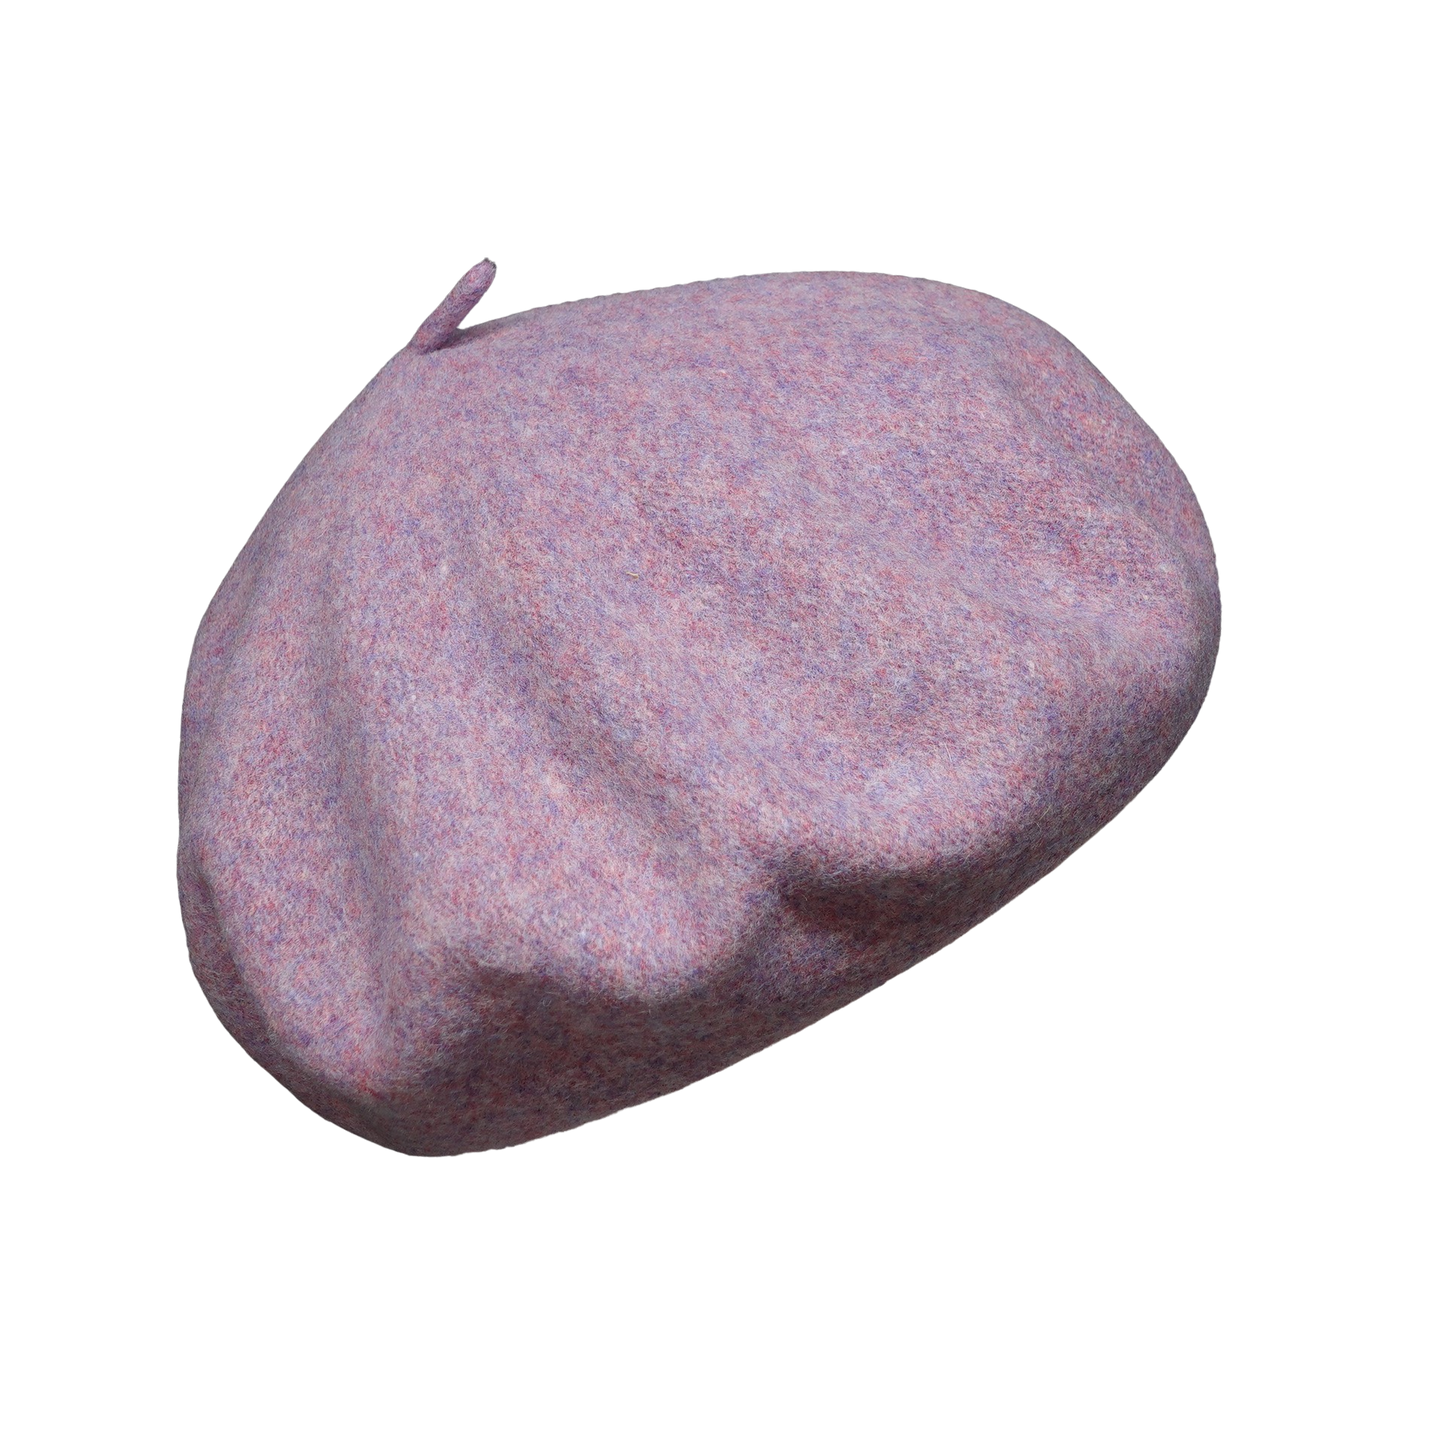 Thicker Wool  Beret  Classic French Beret Plain Colour